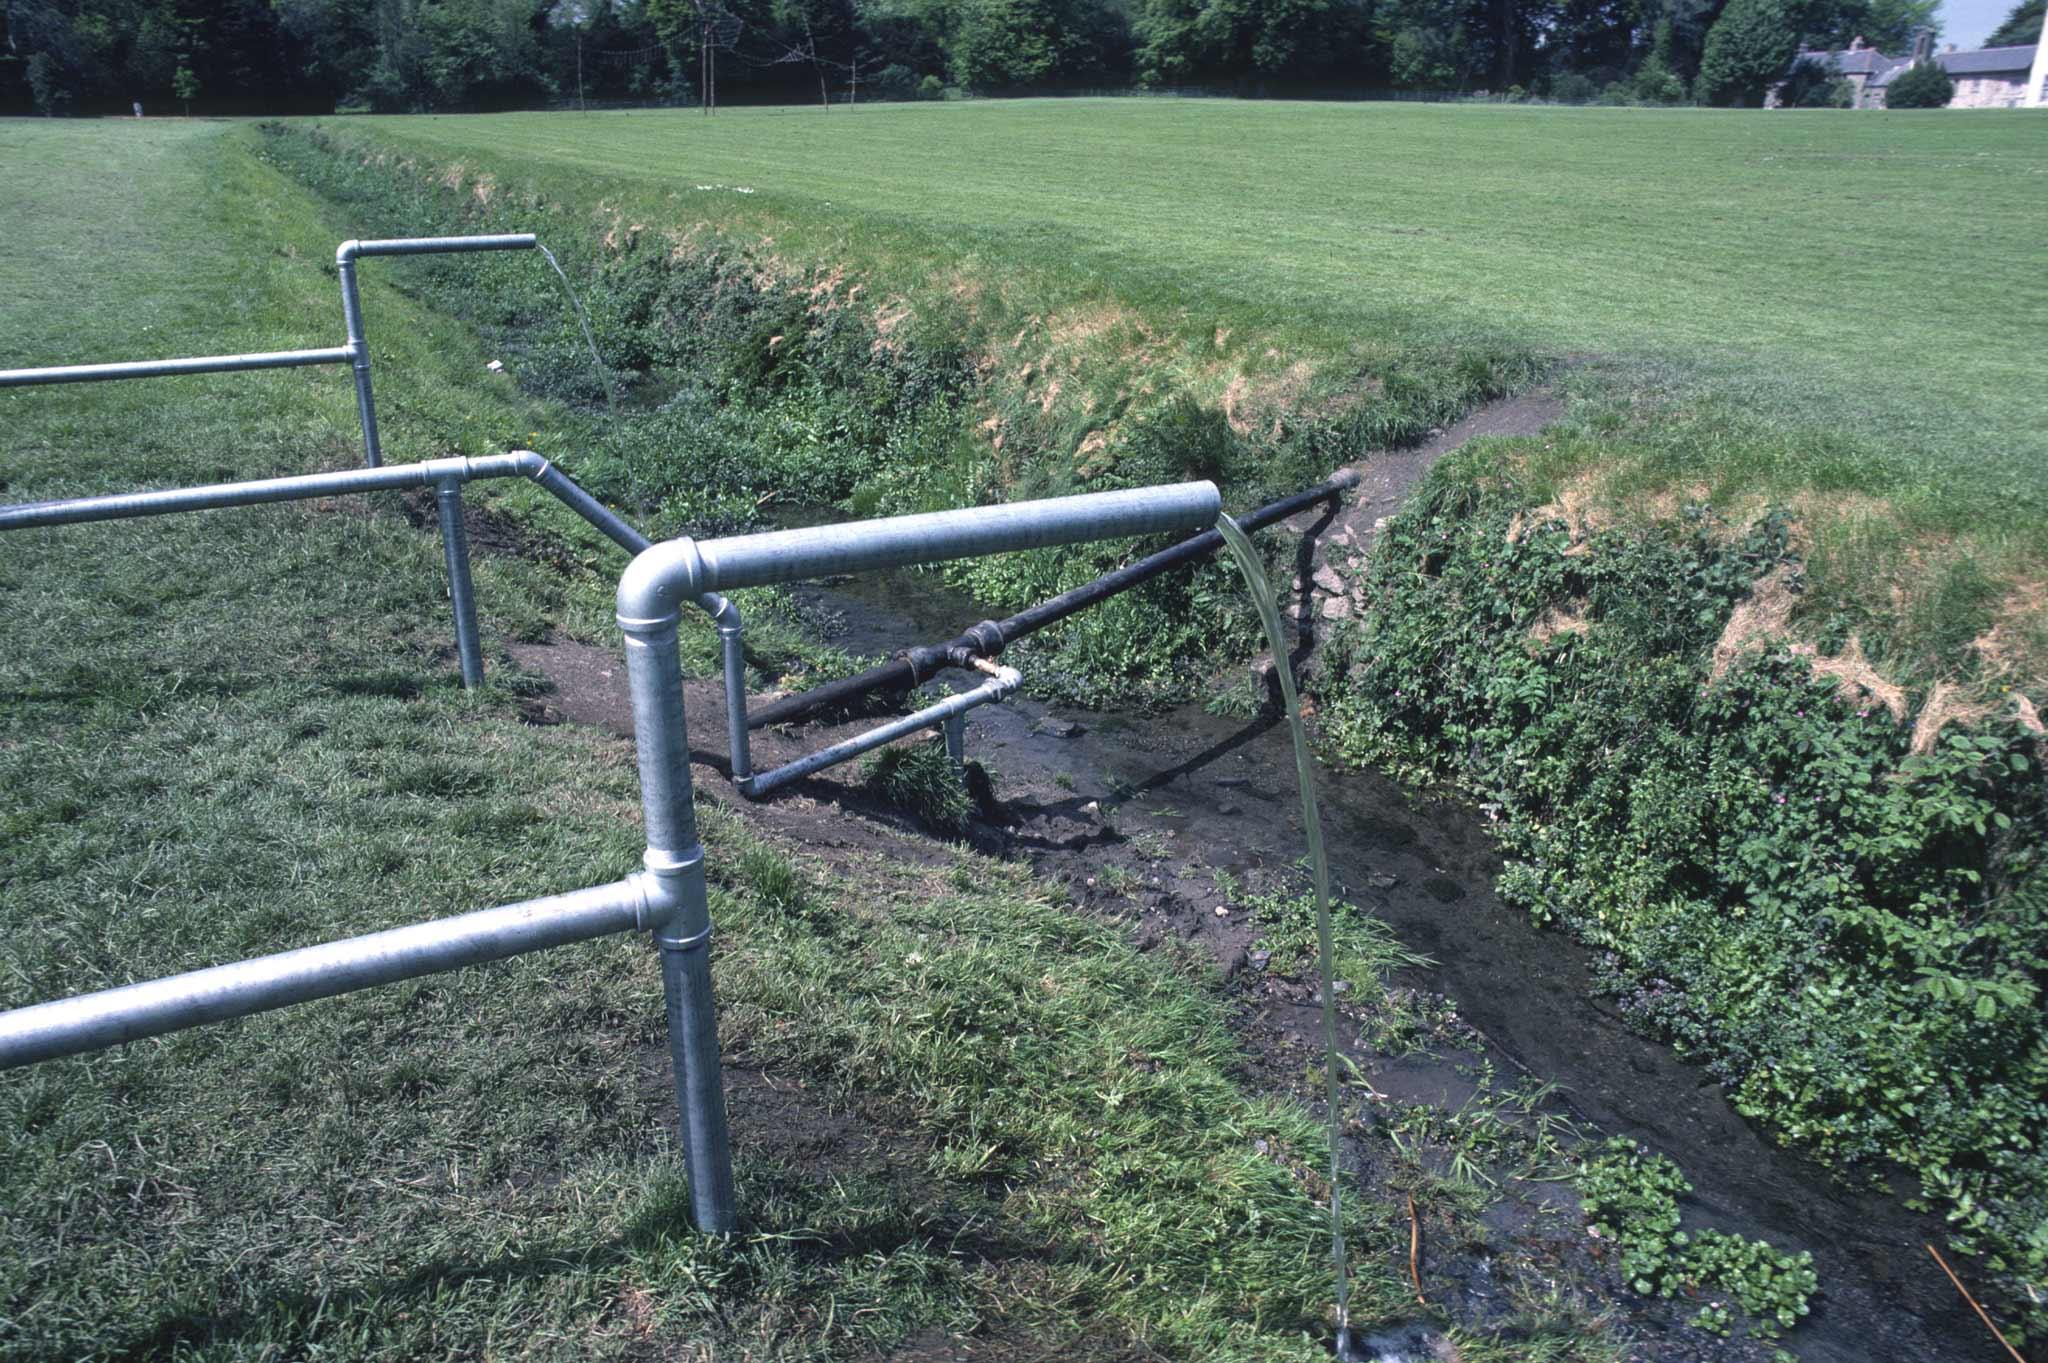 Water flowing from two galvanized pipes and dropping down into a muddy ditch